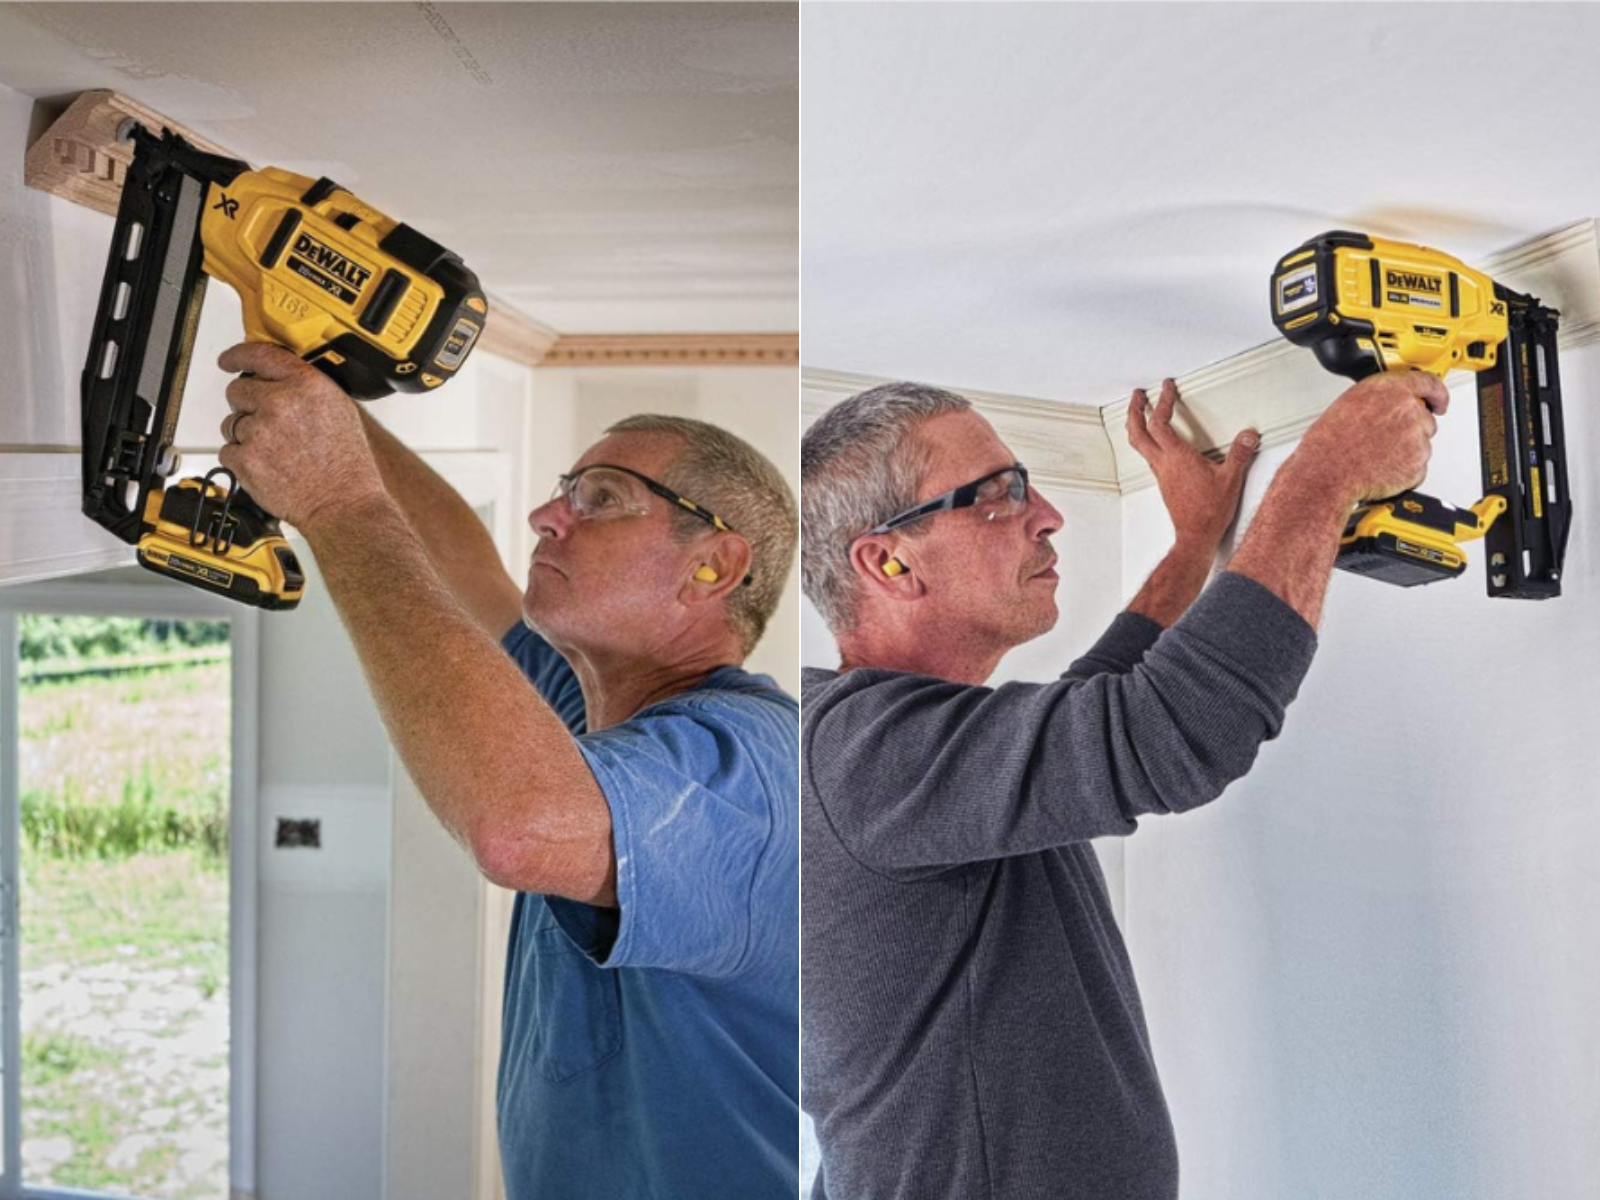 A man in a blue shirt using a framing nailer, and a man in a grey shirt with a straight finish nailer from DeWalt.